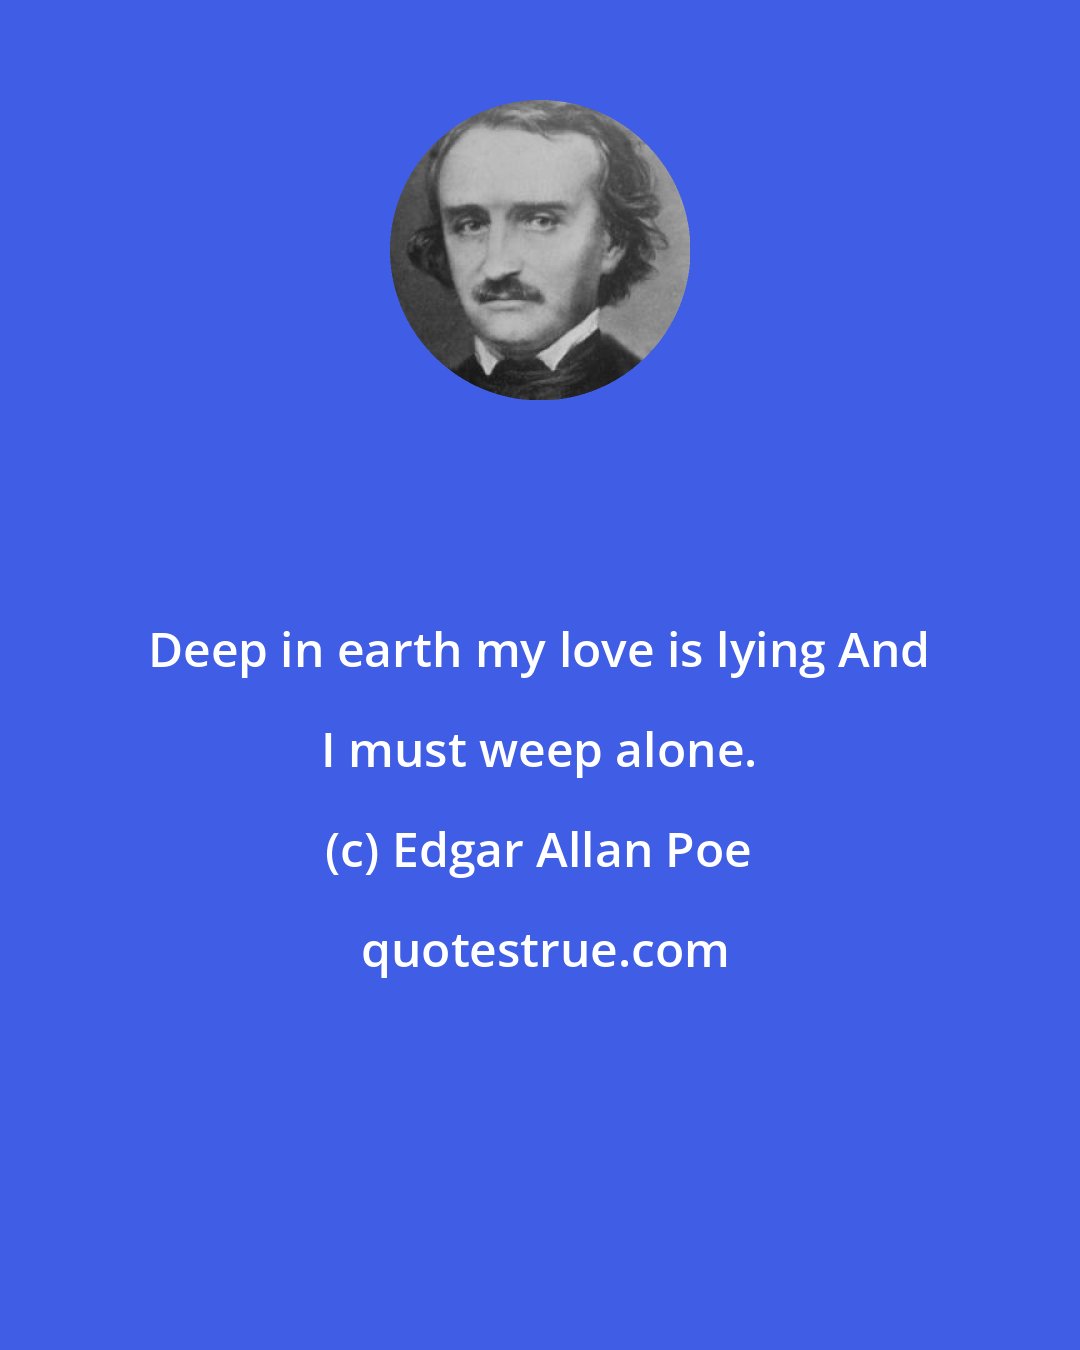 Edgar Allan Poe: Deep in earth my love is lying And I must weep alone.